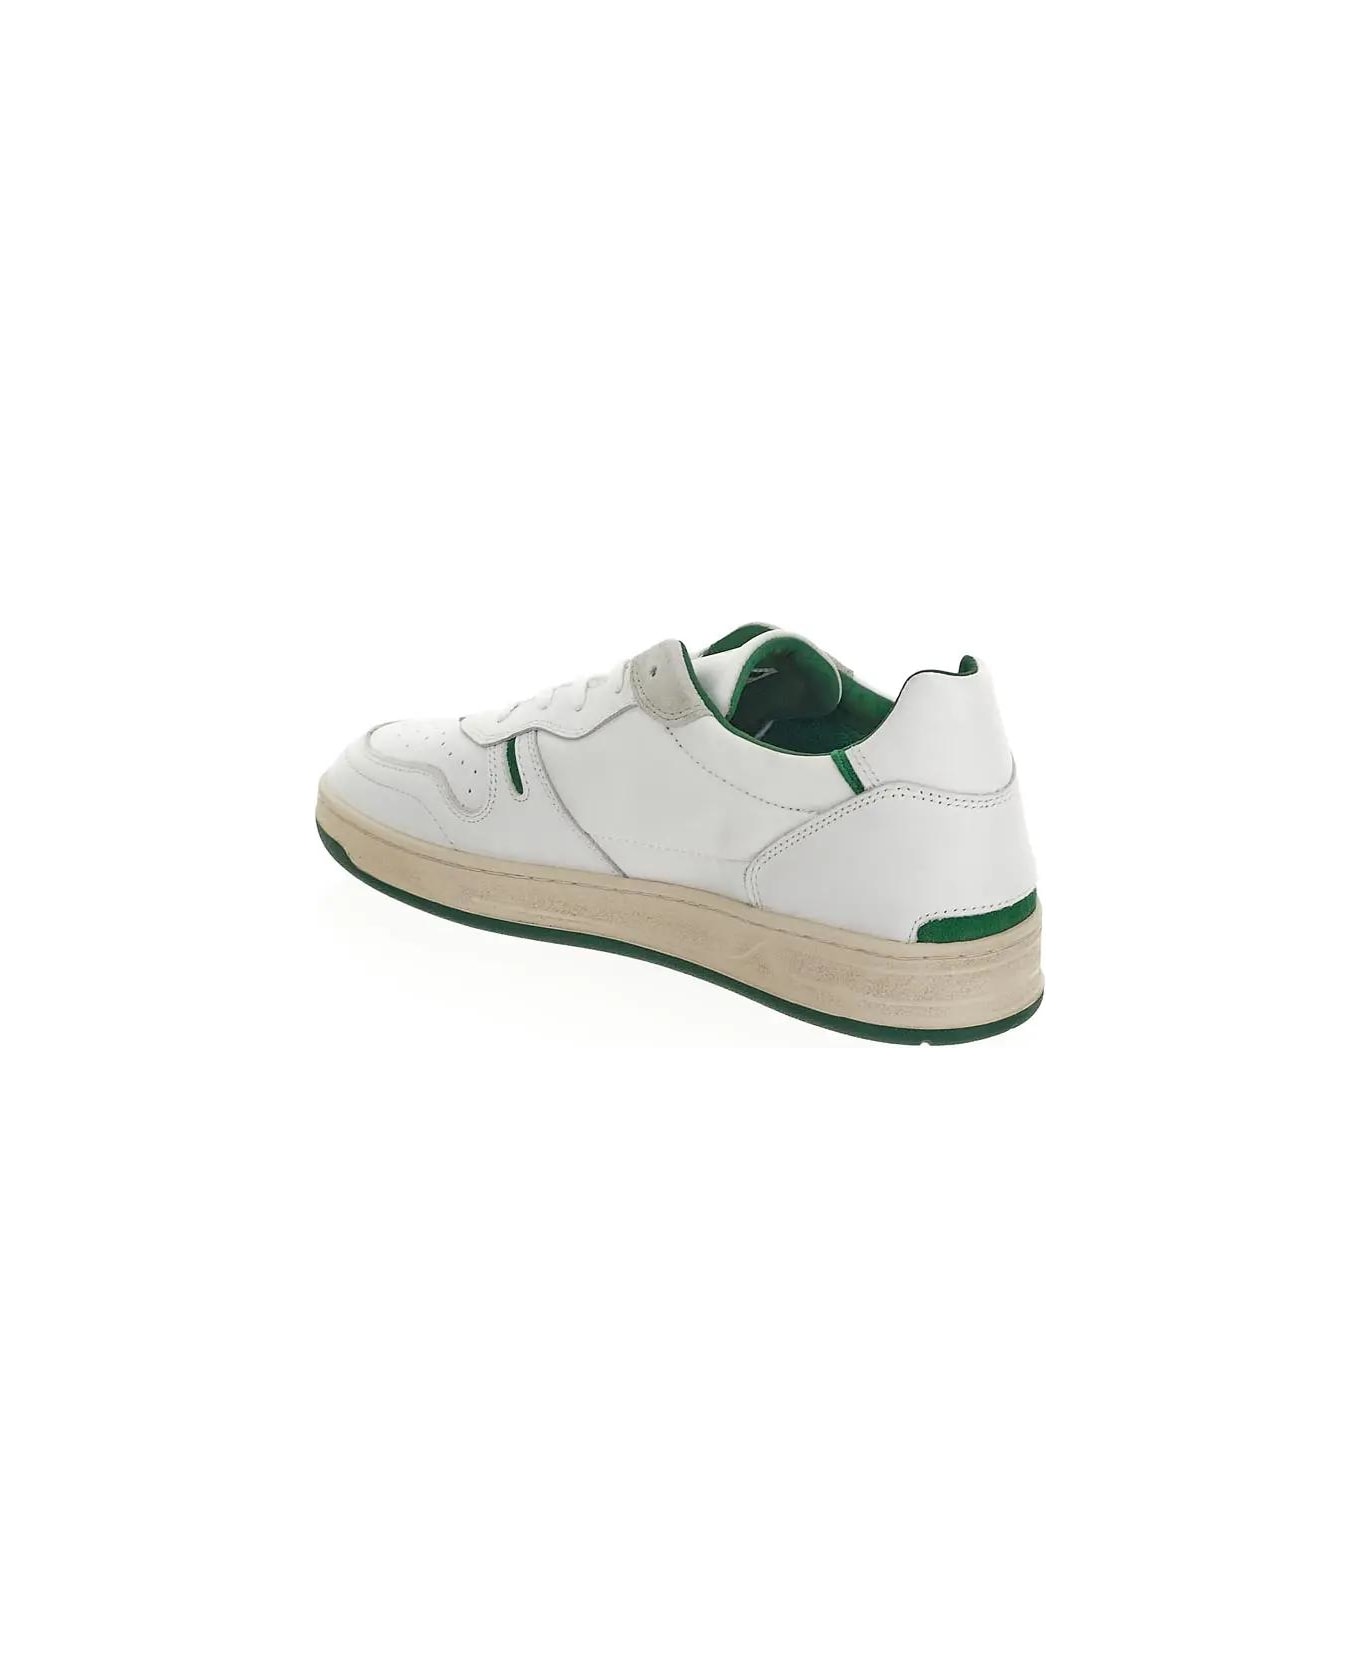 D.A.T.E. Court 2.0 Sneakers - White